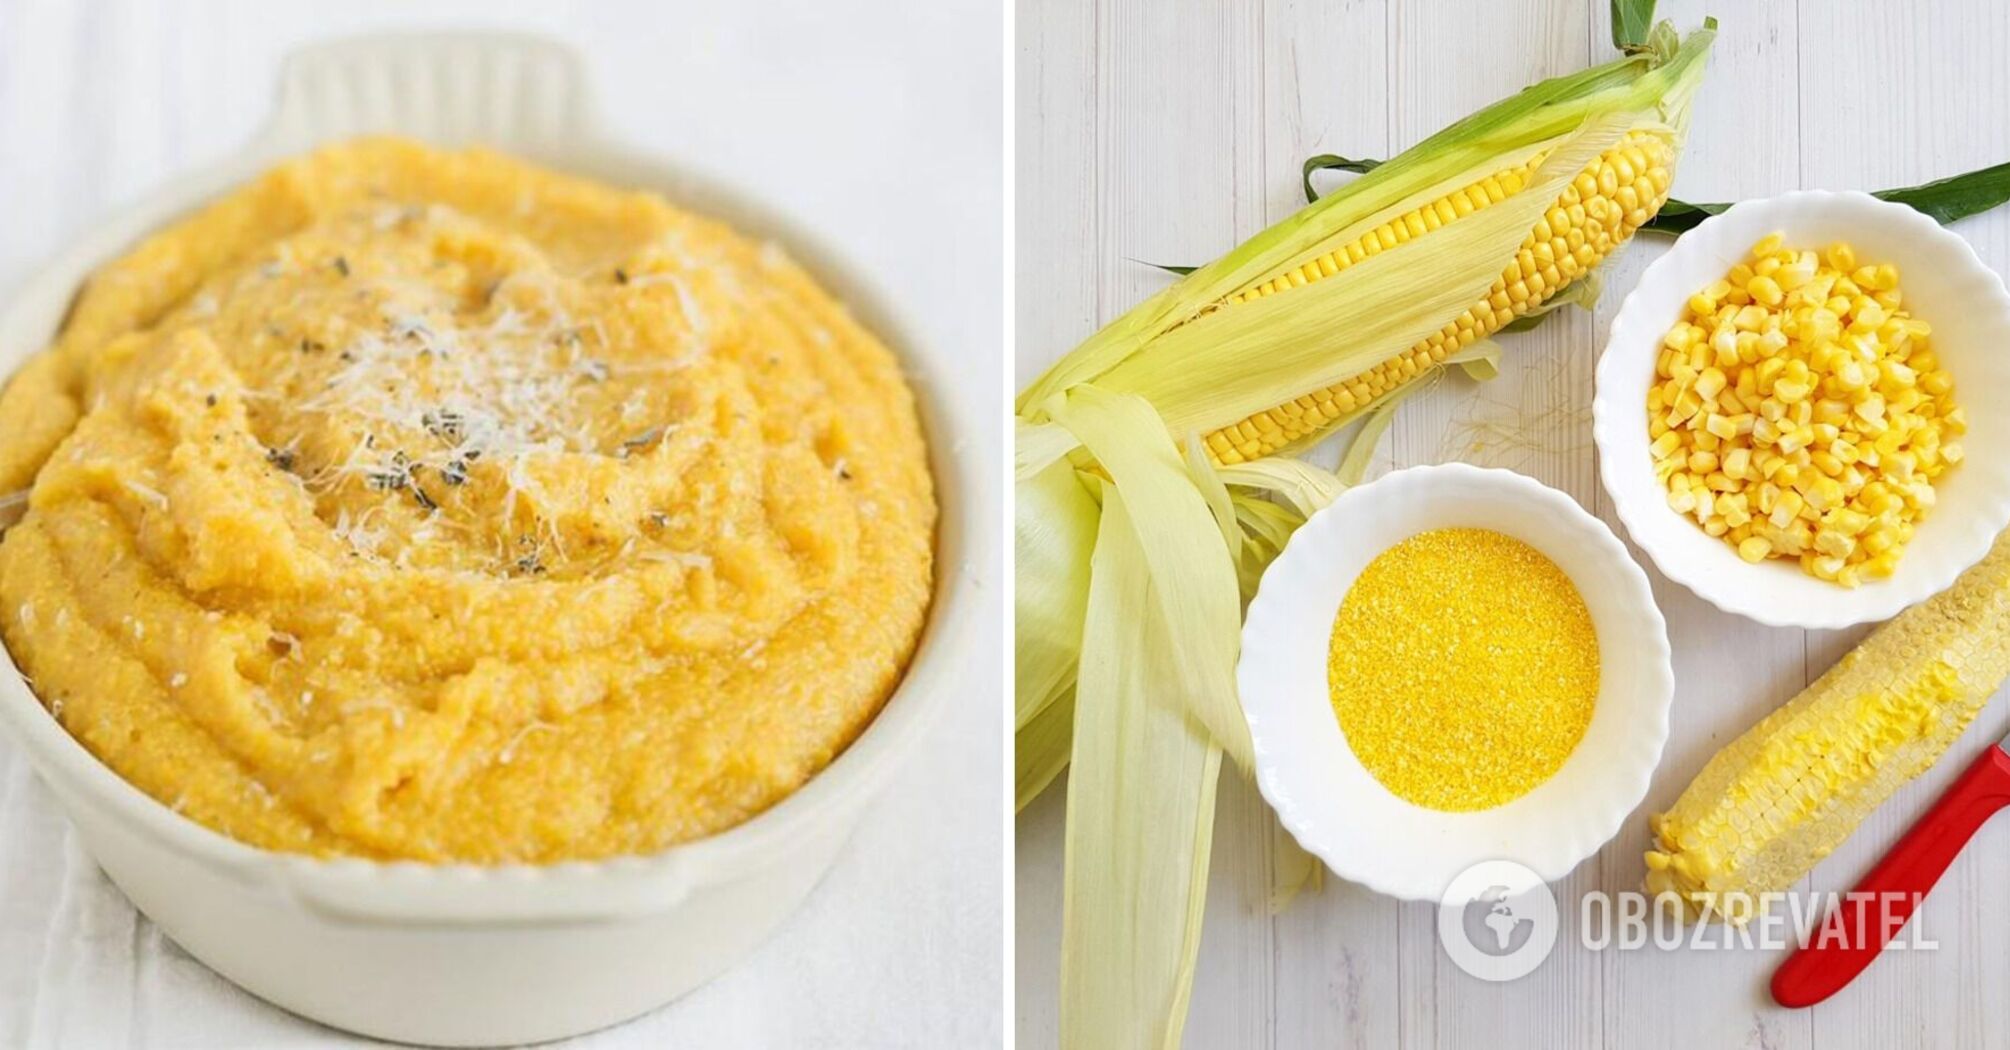 How to cook corn grits polenta in 20 minutes: the recipe